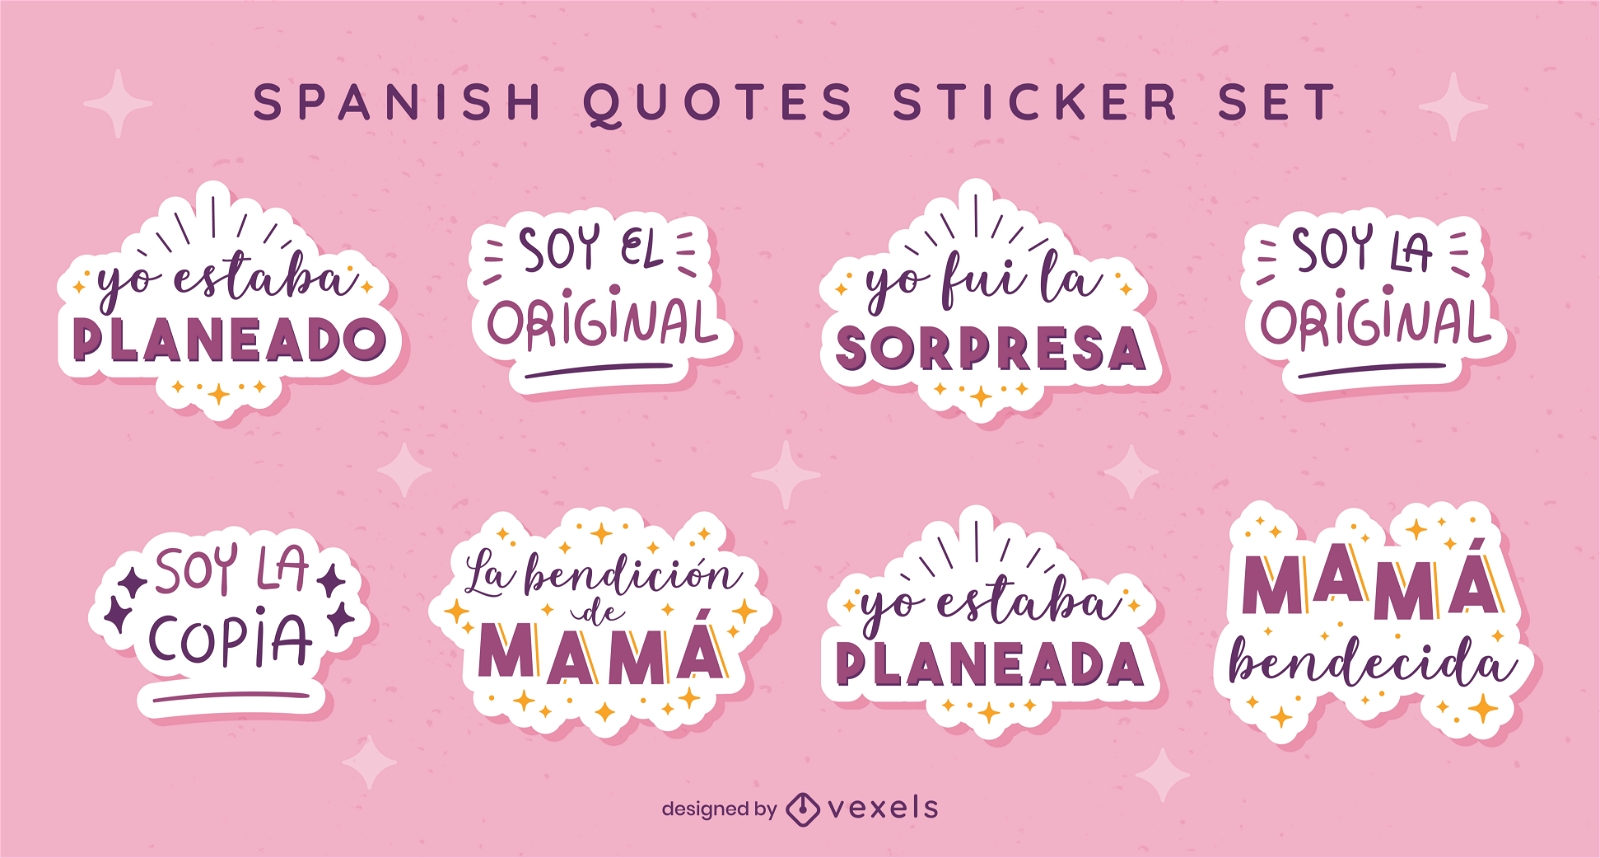 Mom and siblings spanish sticker set